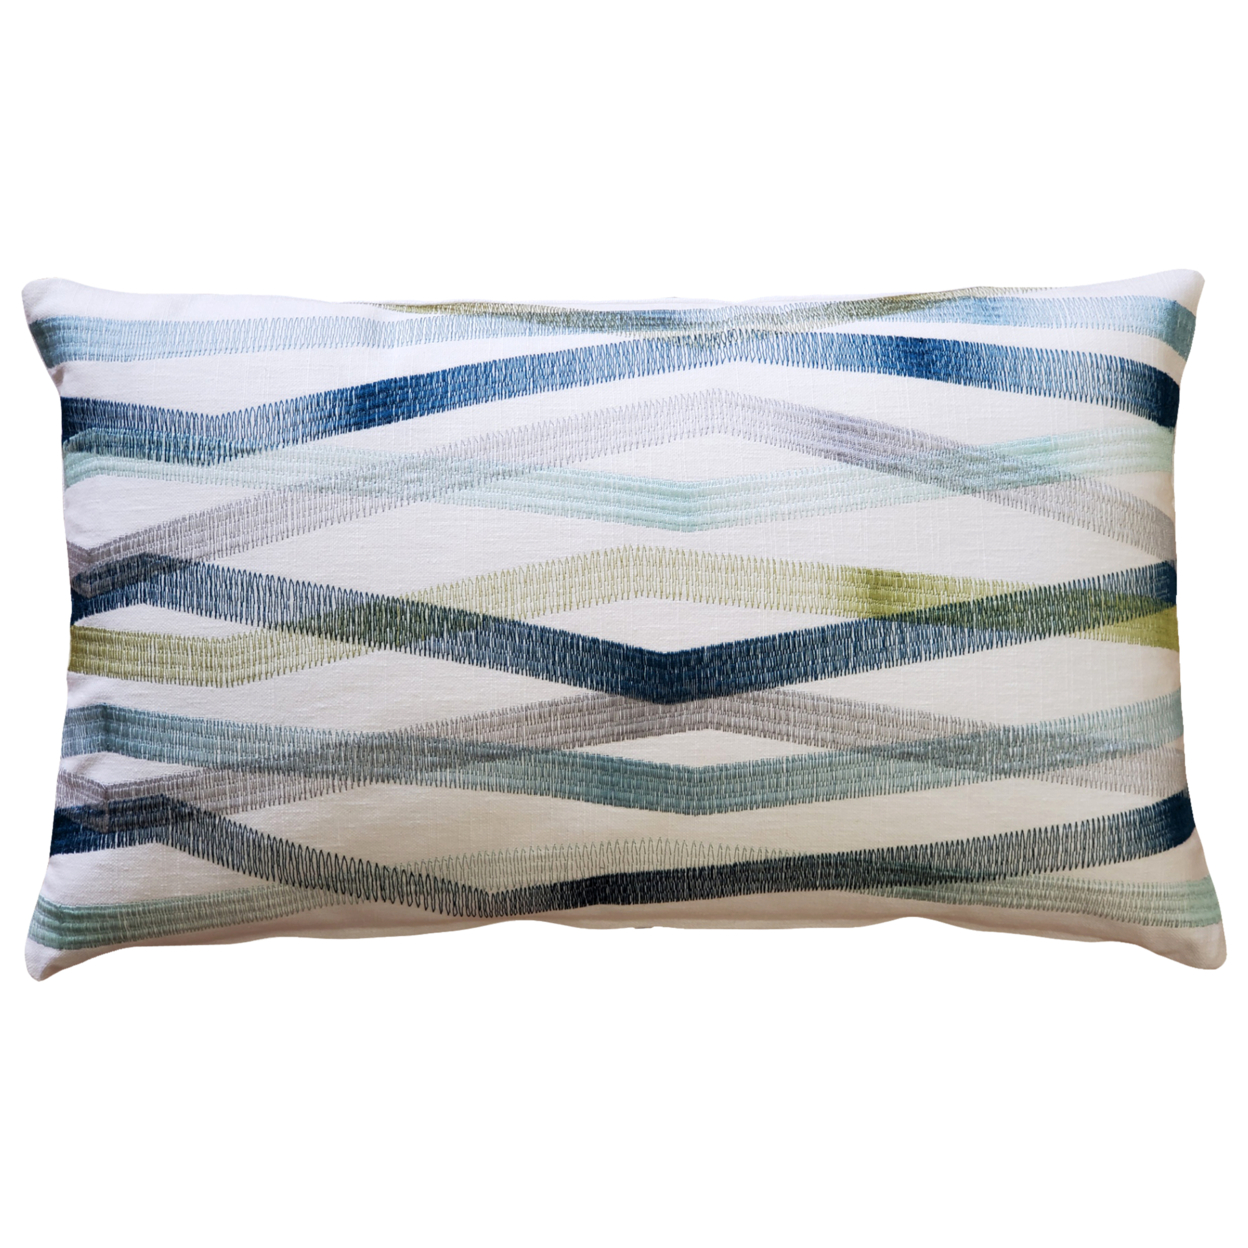 Wandering Lines Deep Sea Throw Pillow 12x19 Inches Square, Complete Pillow With Polyfill Pillow Insert